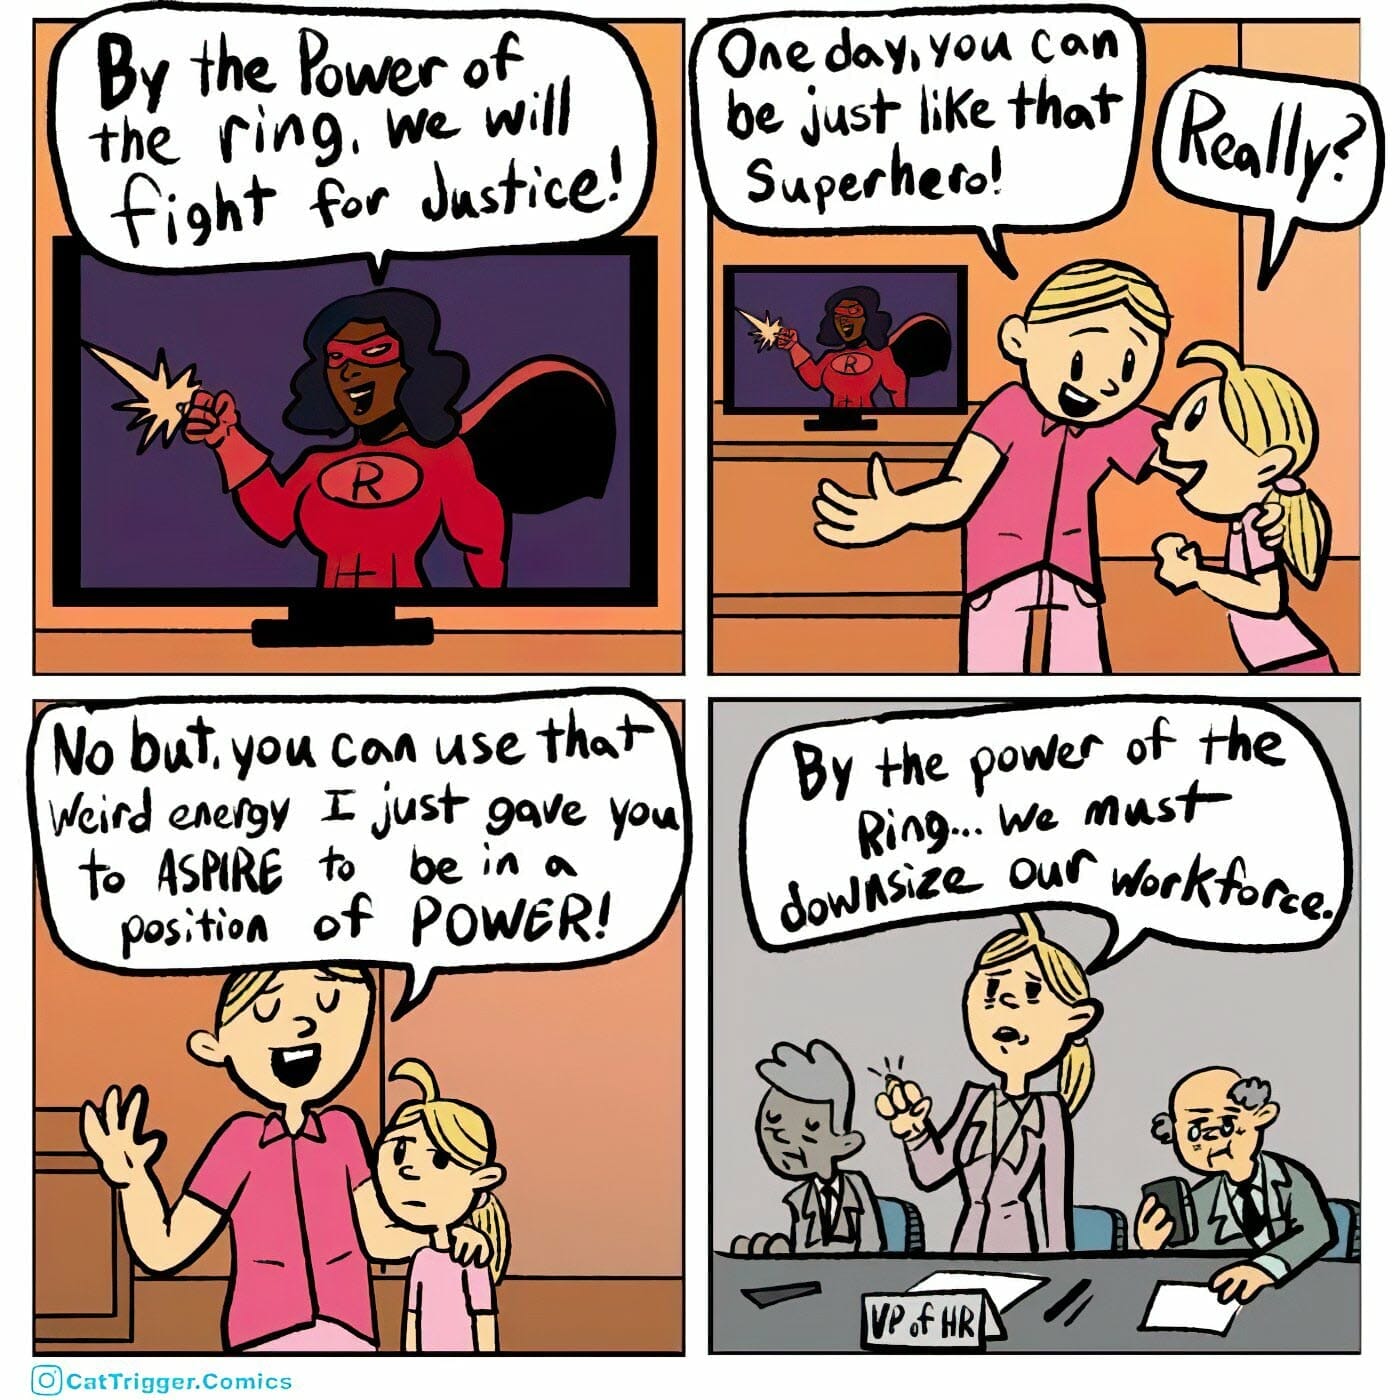 Four panel comic; young girl shown superhero story, discovers she won't get powers but could aspire to do good.... and ends up firing people as a job